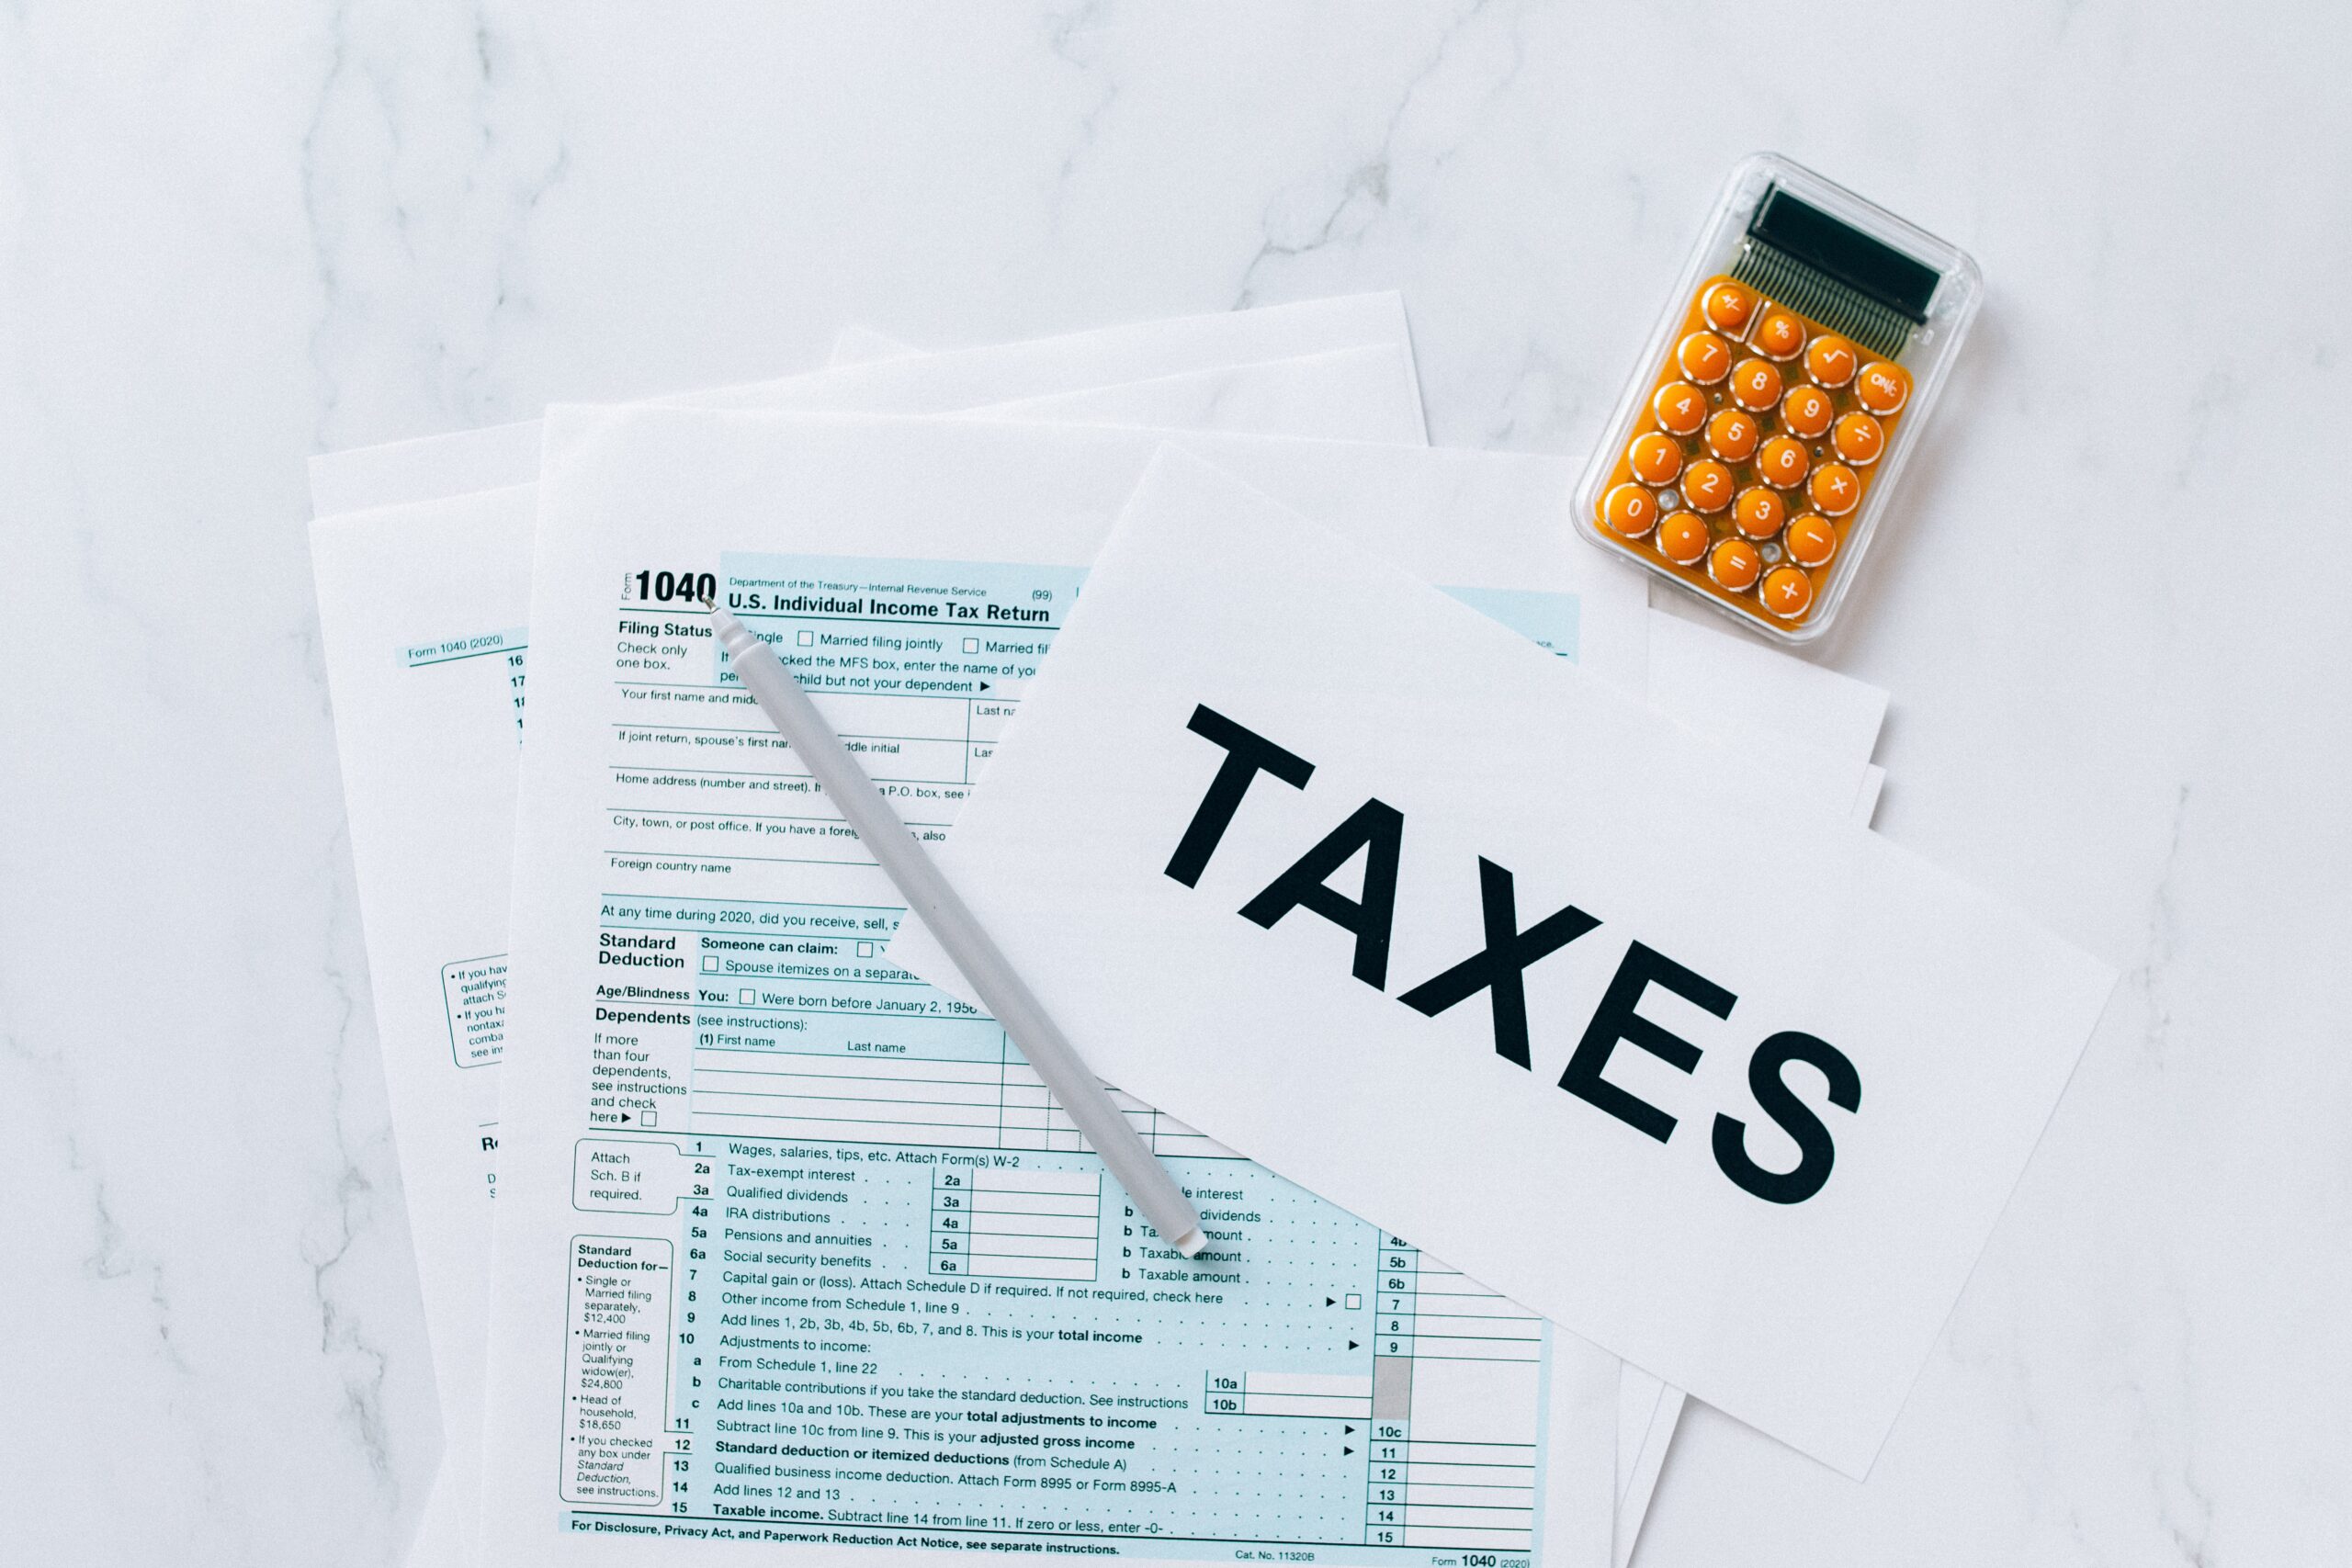 Stay Ahead of the Game: File Your 2022 Tax Returns Early and Enjoy Peace of Mind